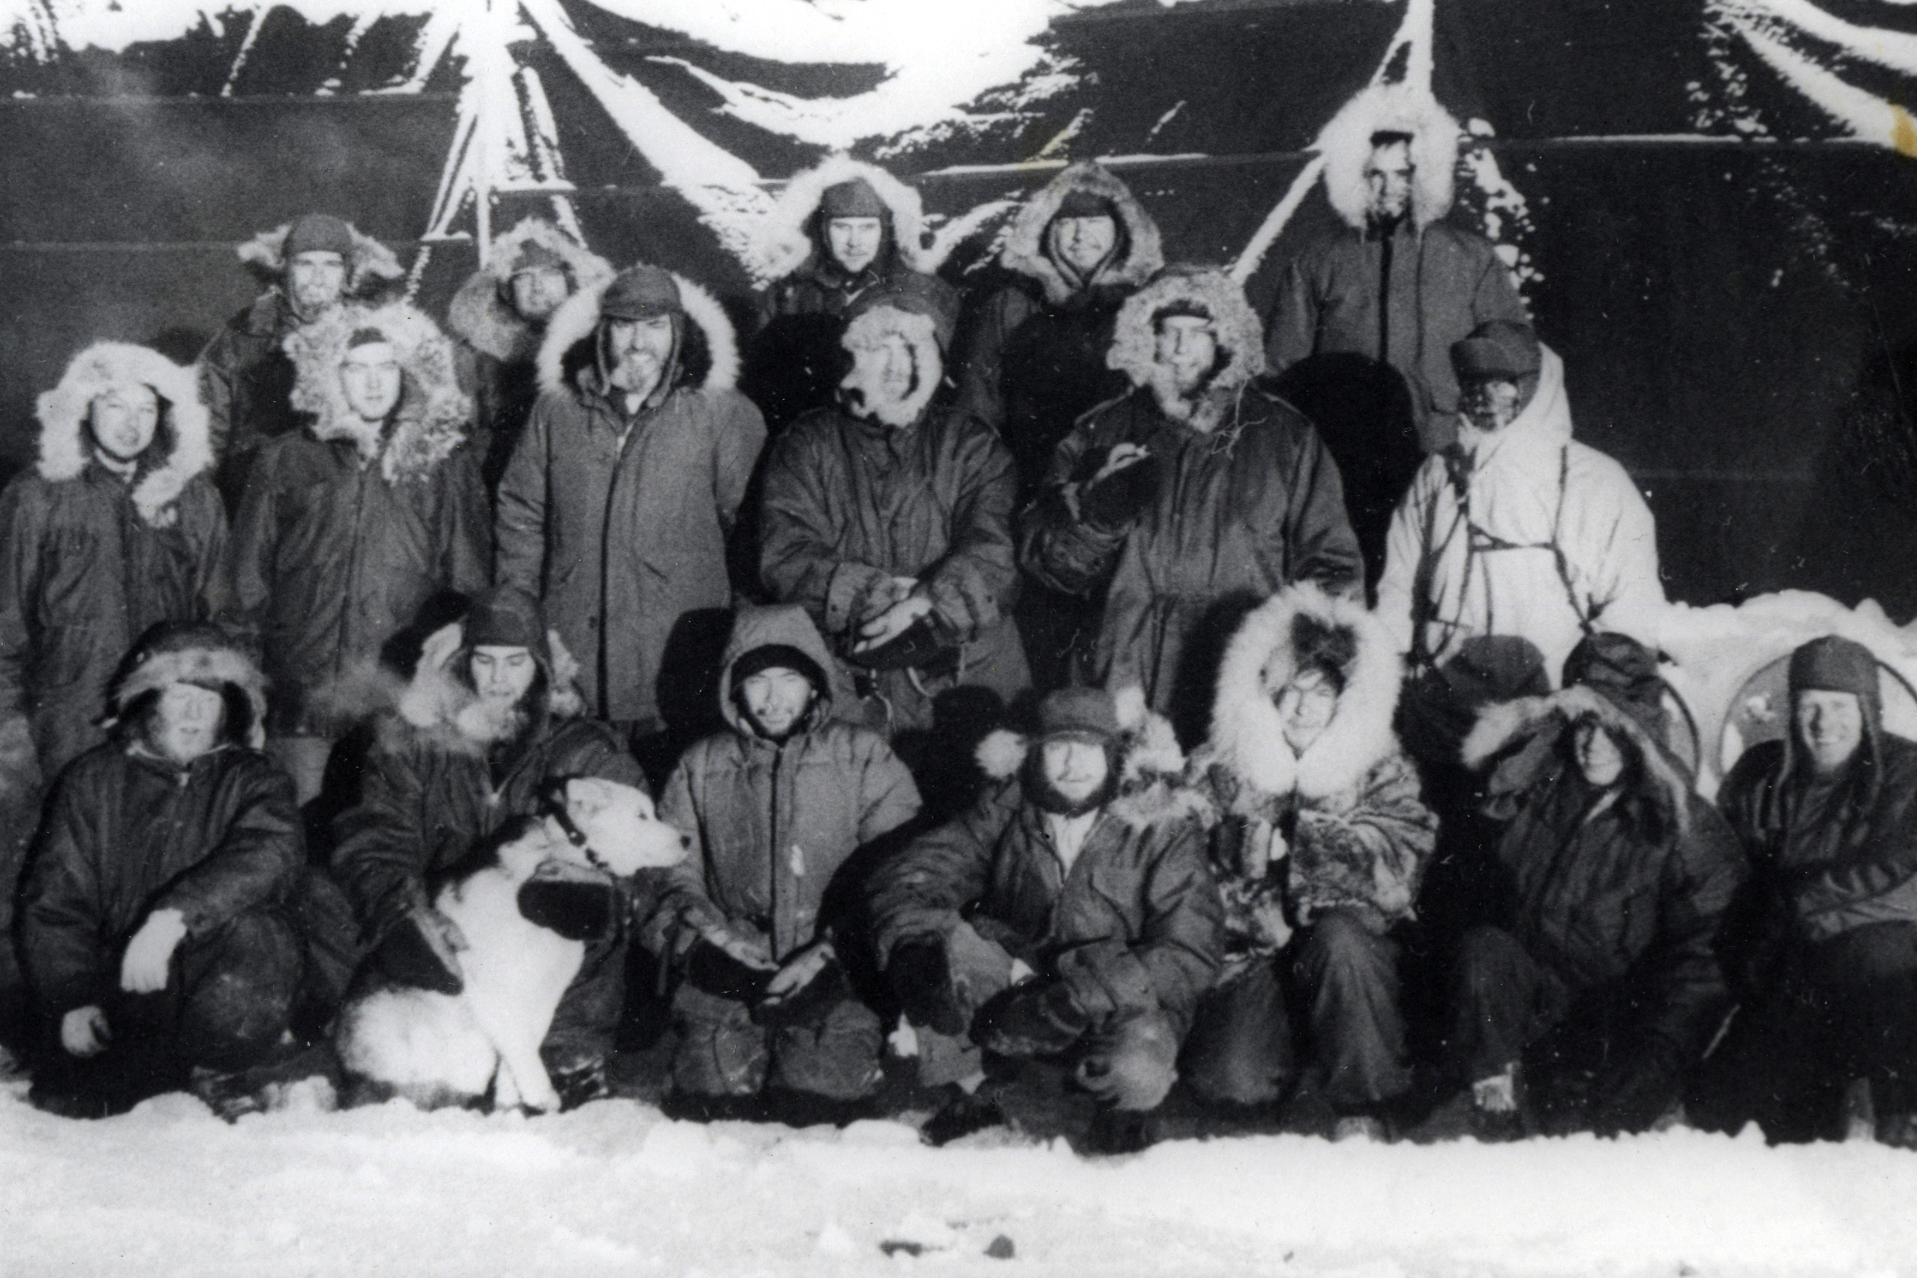 A group of men pose for a picture in winter clothes.